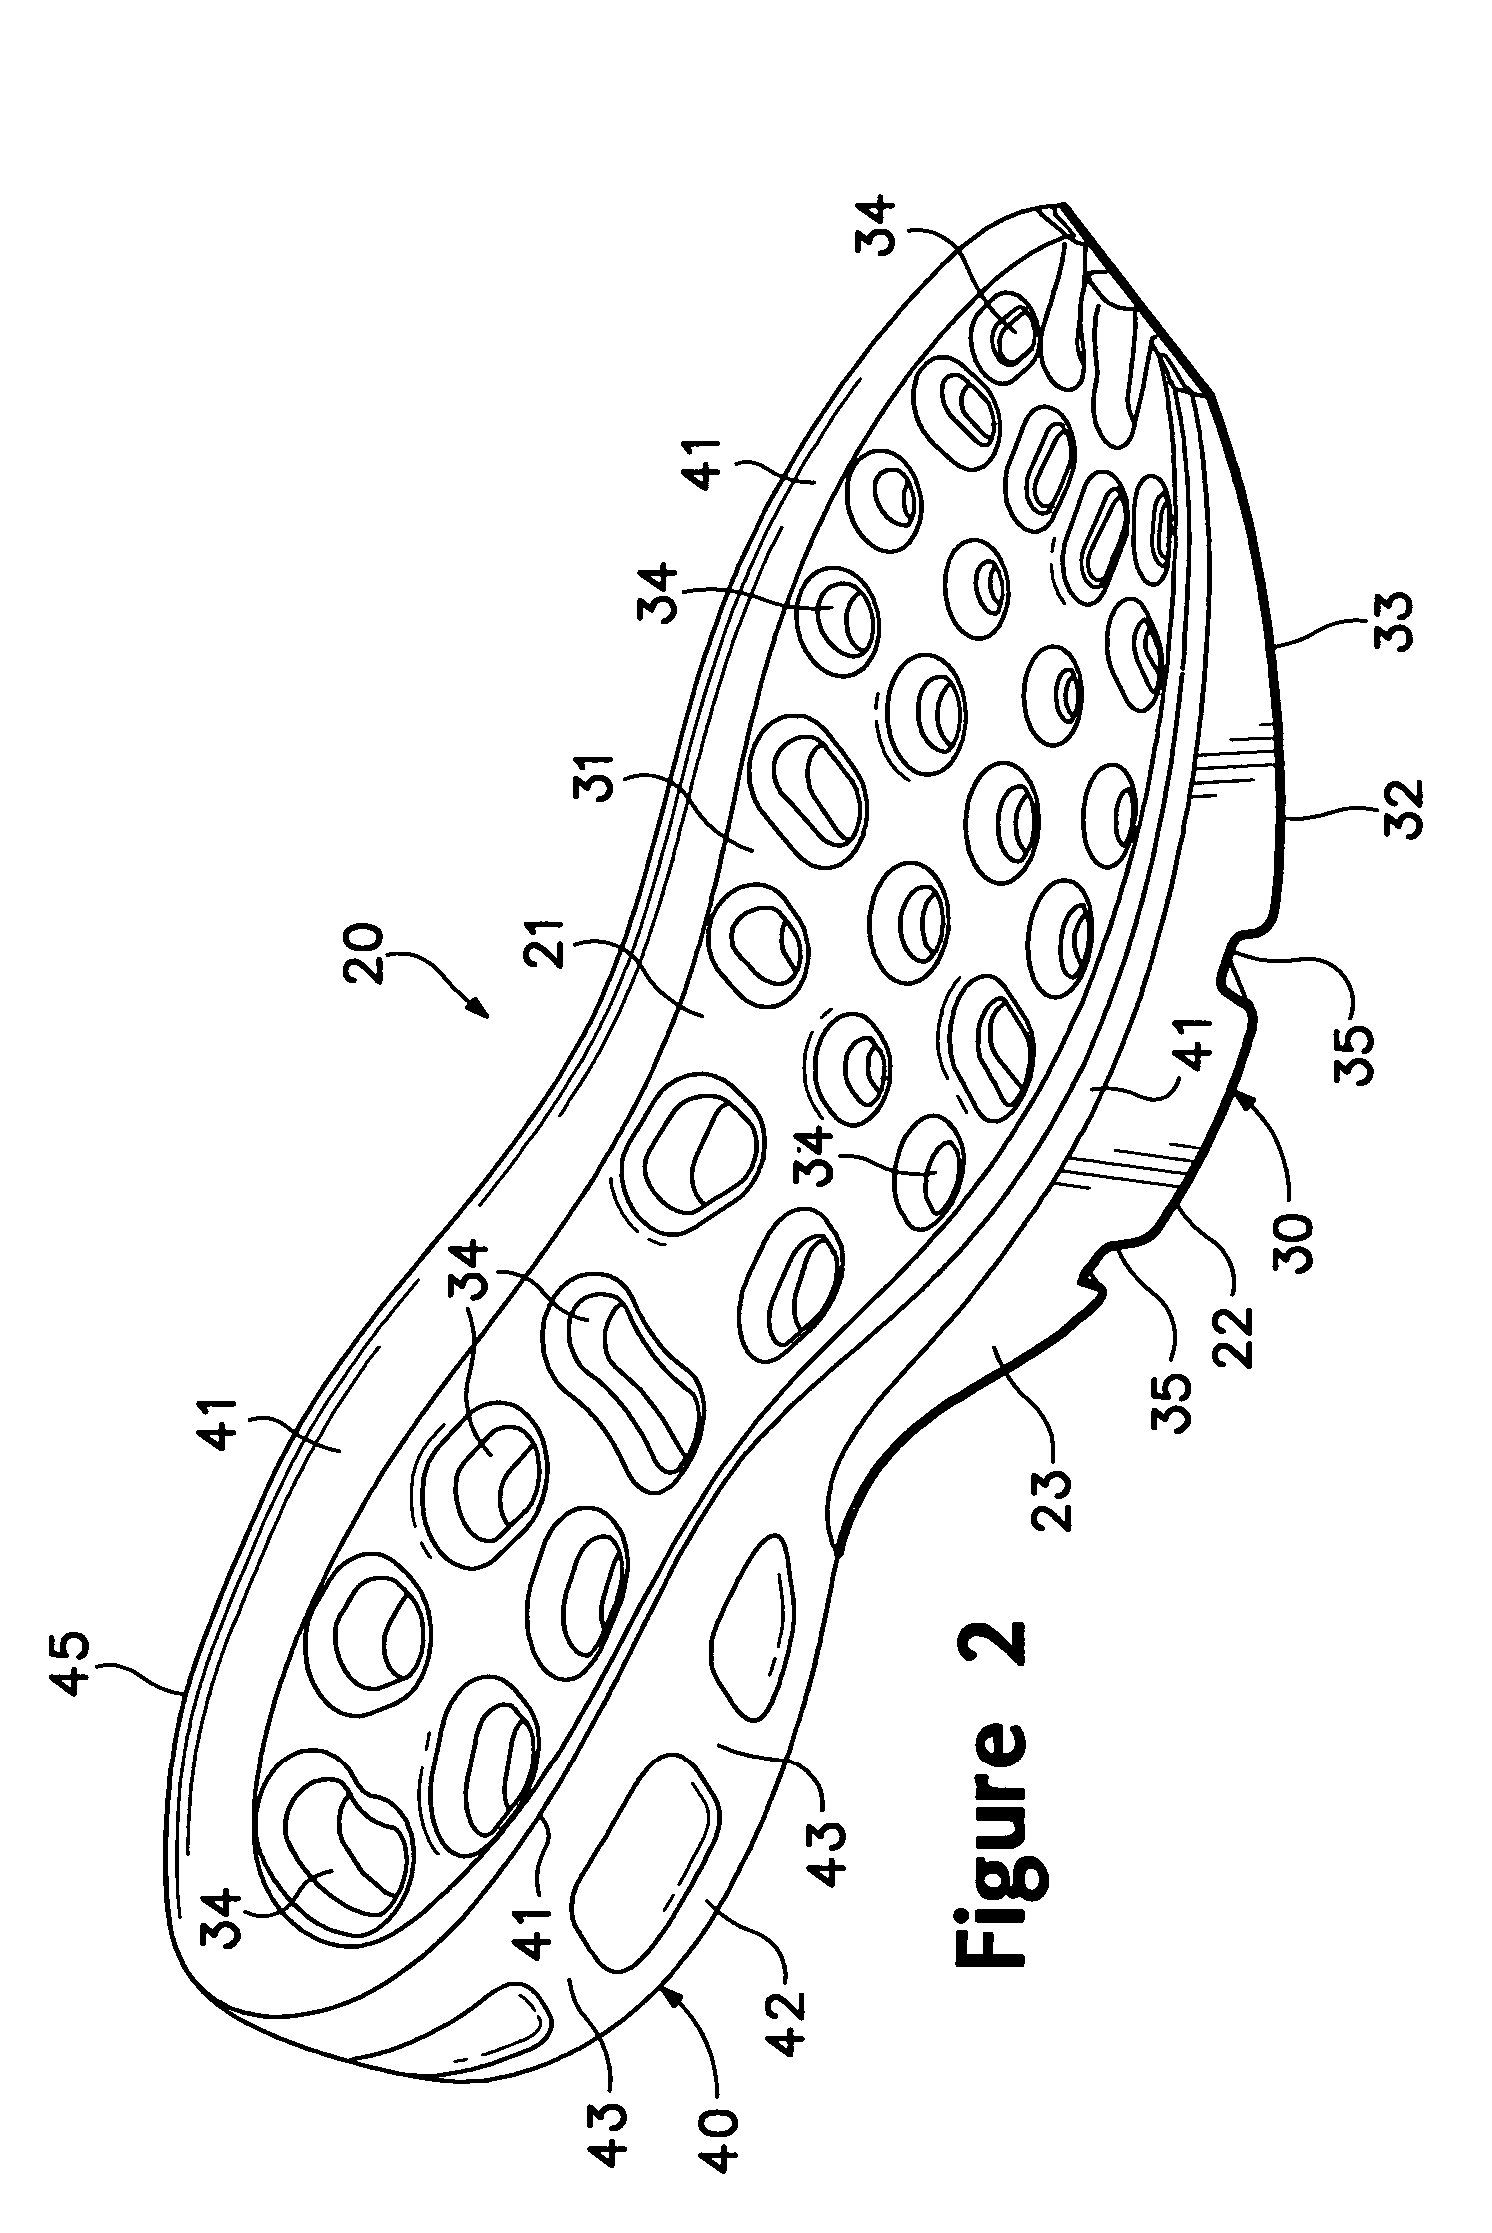 Method of making article of footwear having a fluid-filled bladder with a reinforcing structure